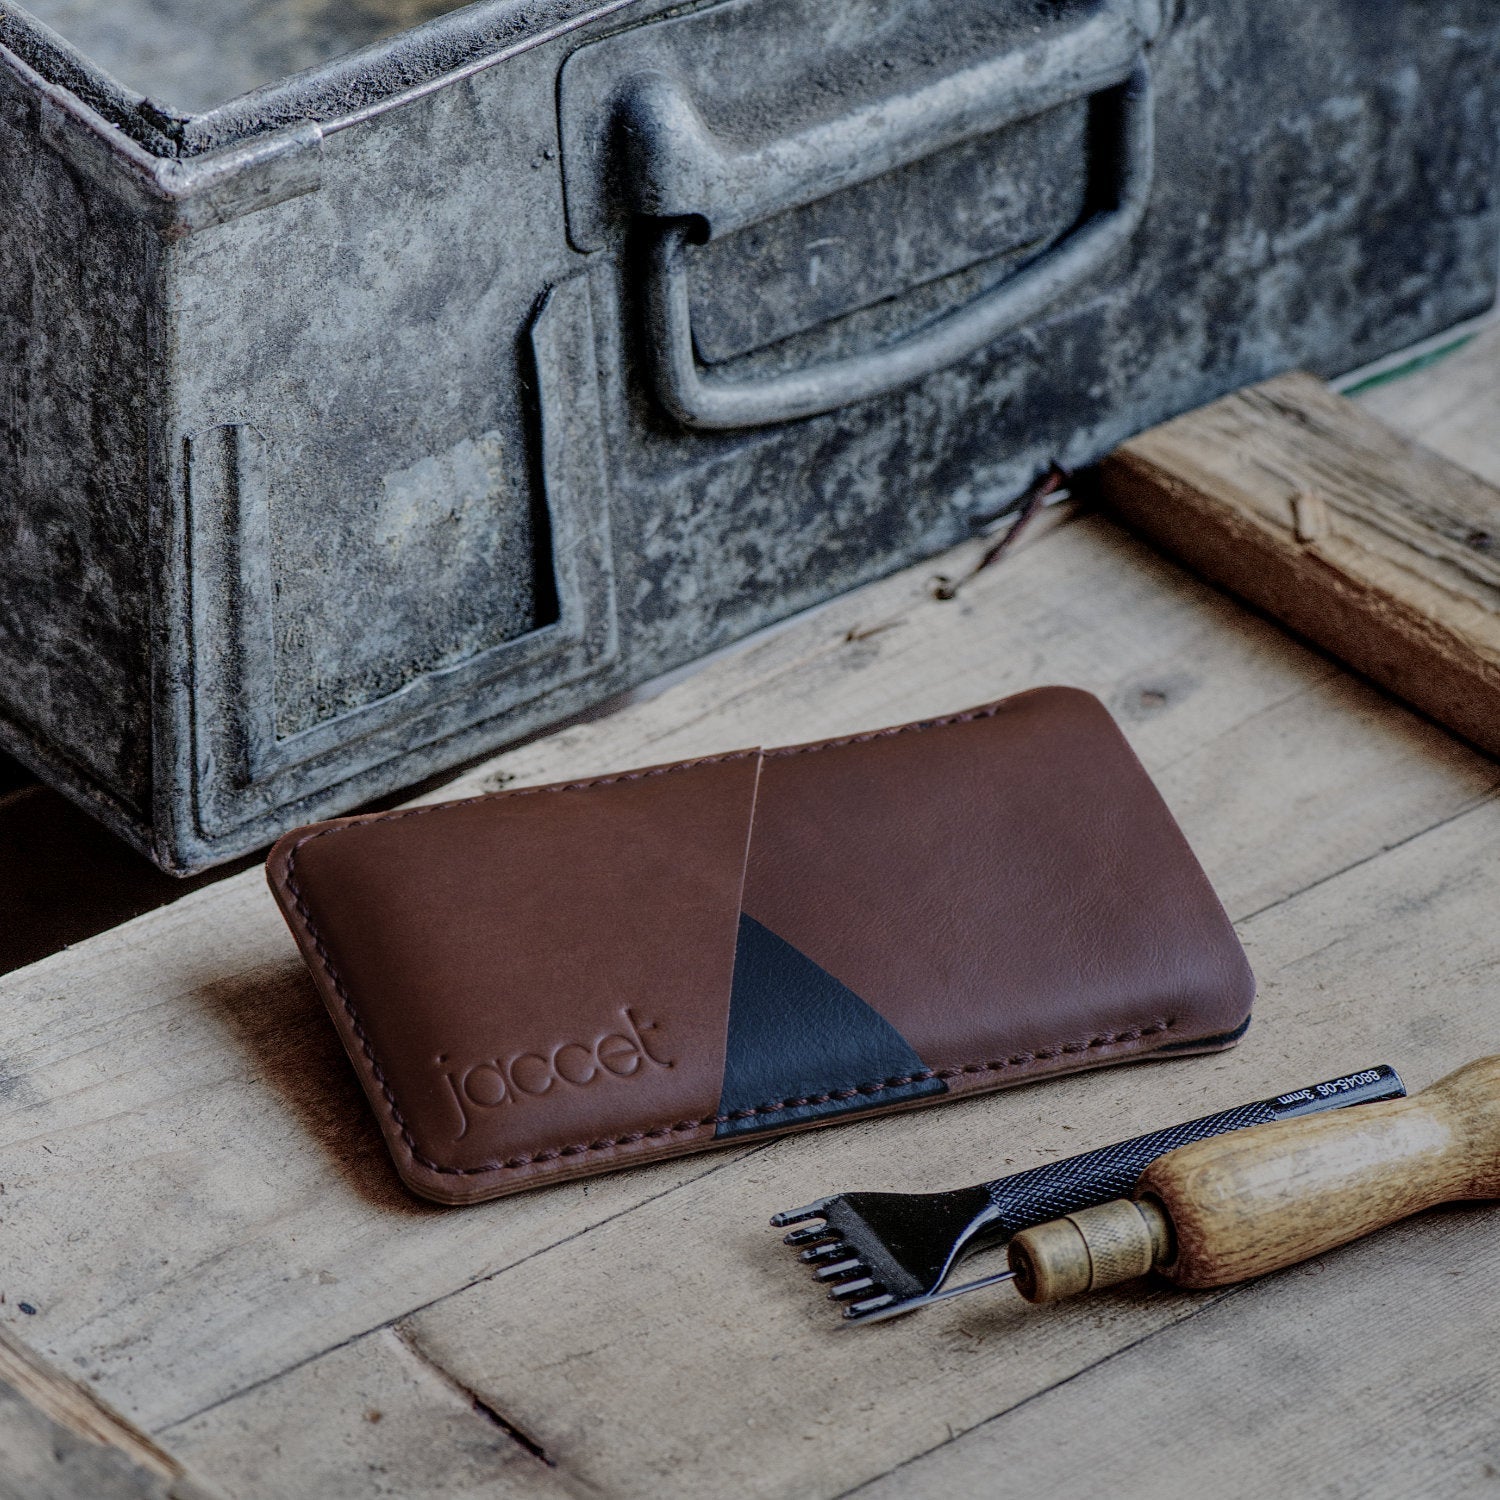 Full-grain leather OPPO sleeve - Brown leather with two pockets voor cards